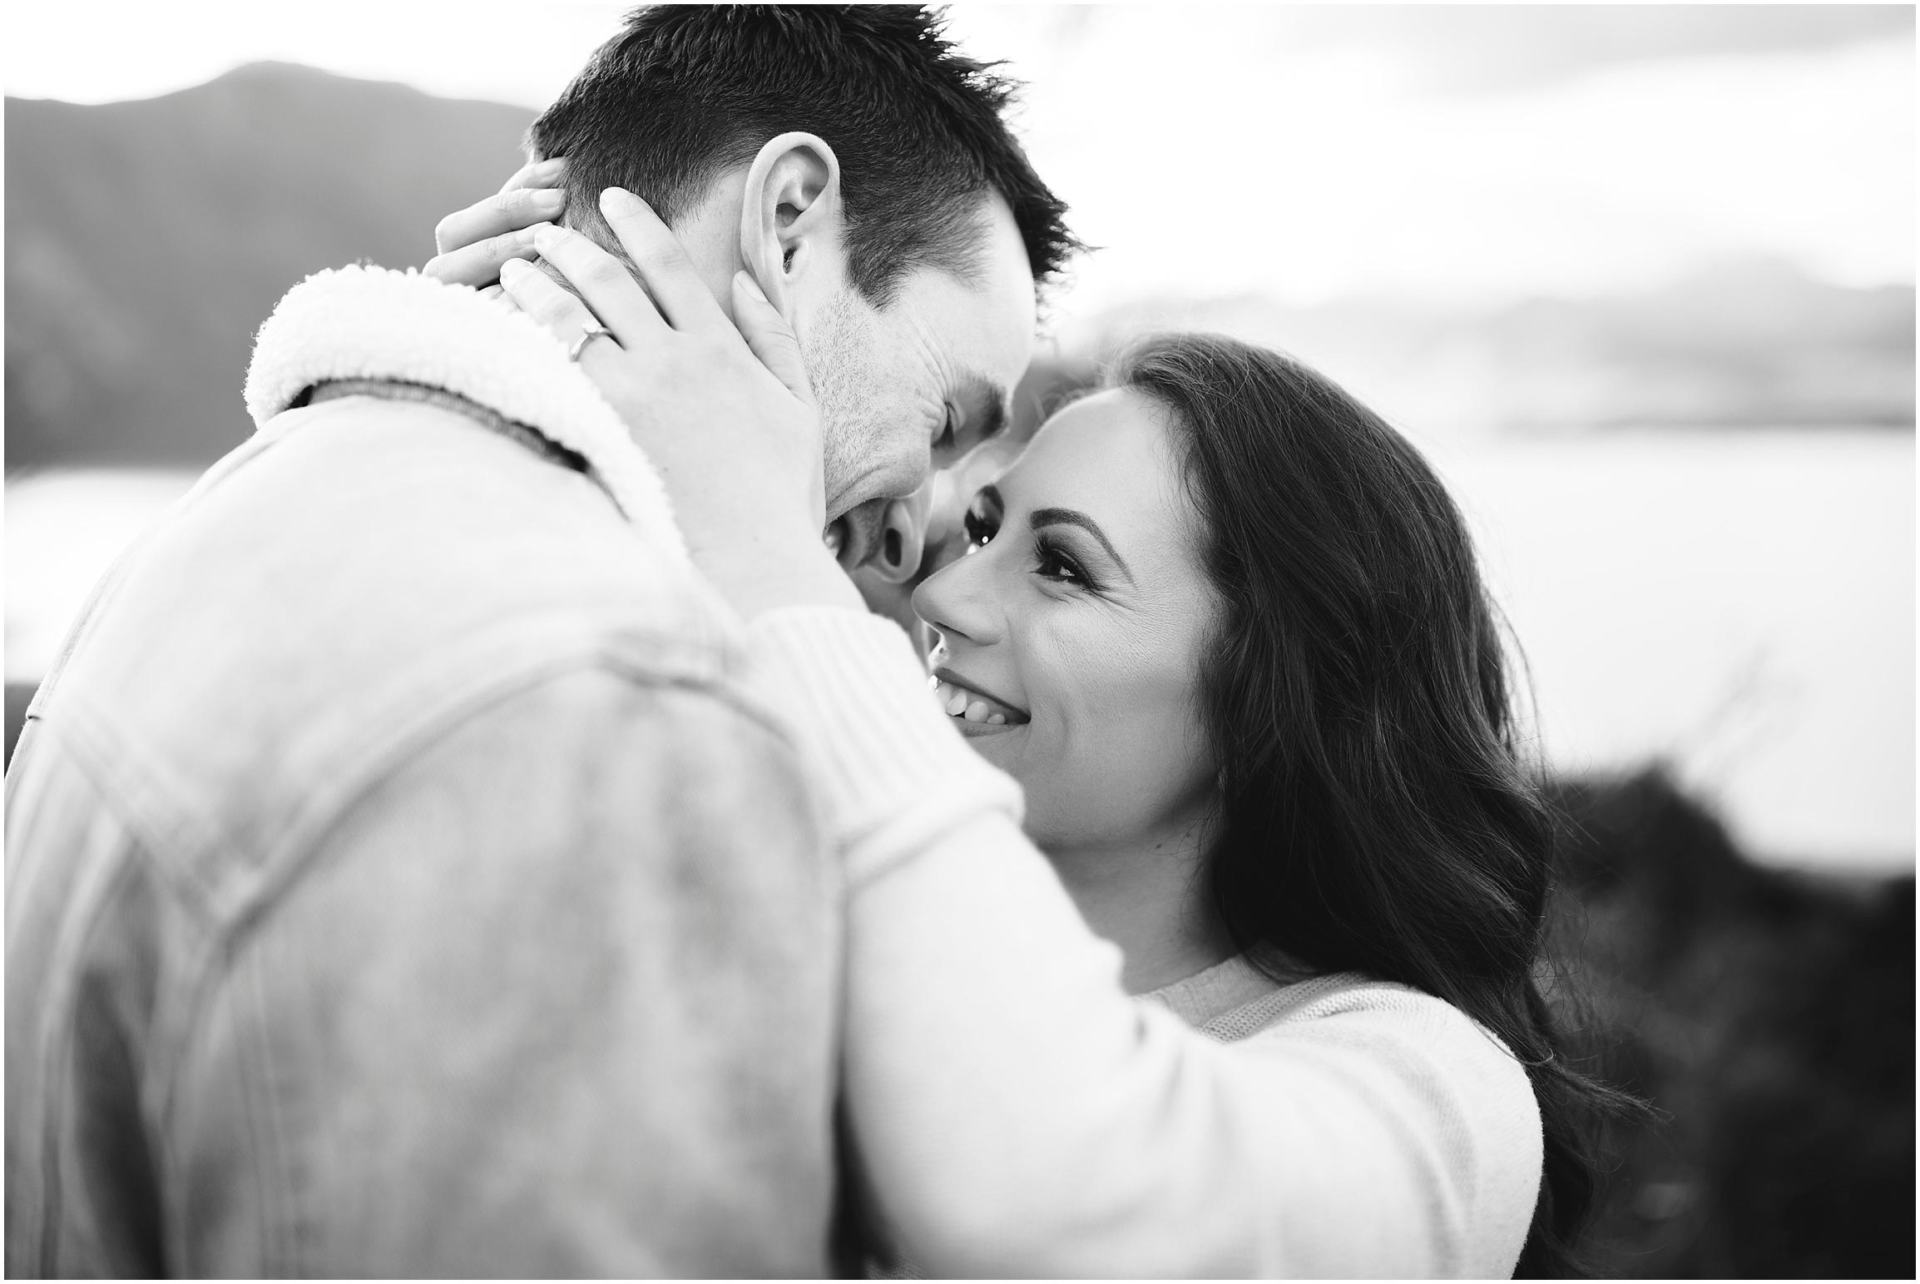 Charlotte Kiri Photography - Engagement Photography with a black and white close-up of a happy couple embracing and smiling at each other, with a lake and mountains faded out in the background, in Wanaka, New Zealand